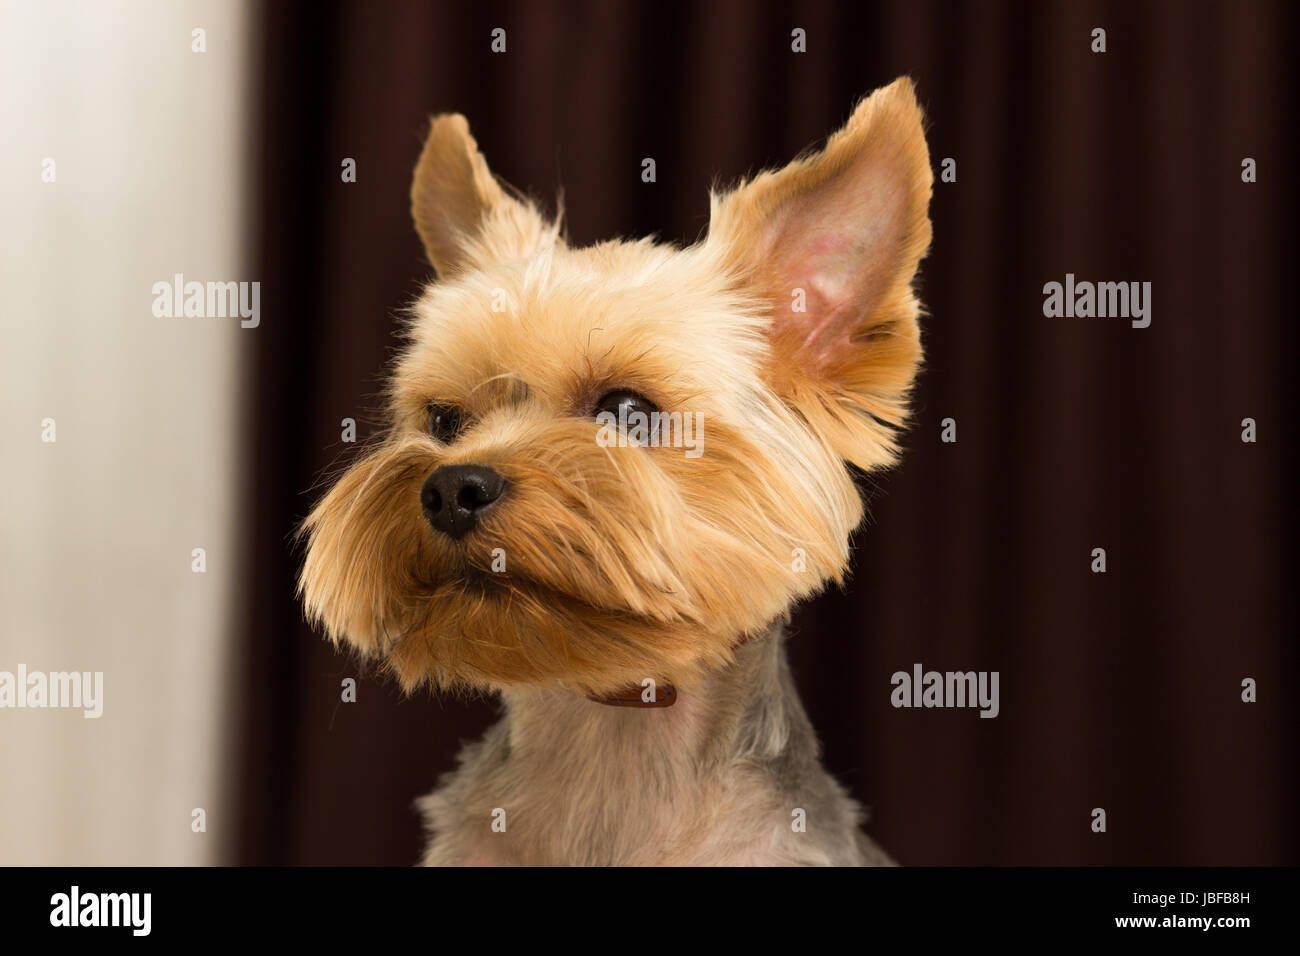 Yorkshire Terrier dog after haircut, close-up portrait Stock Photo